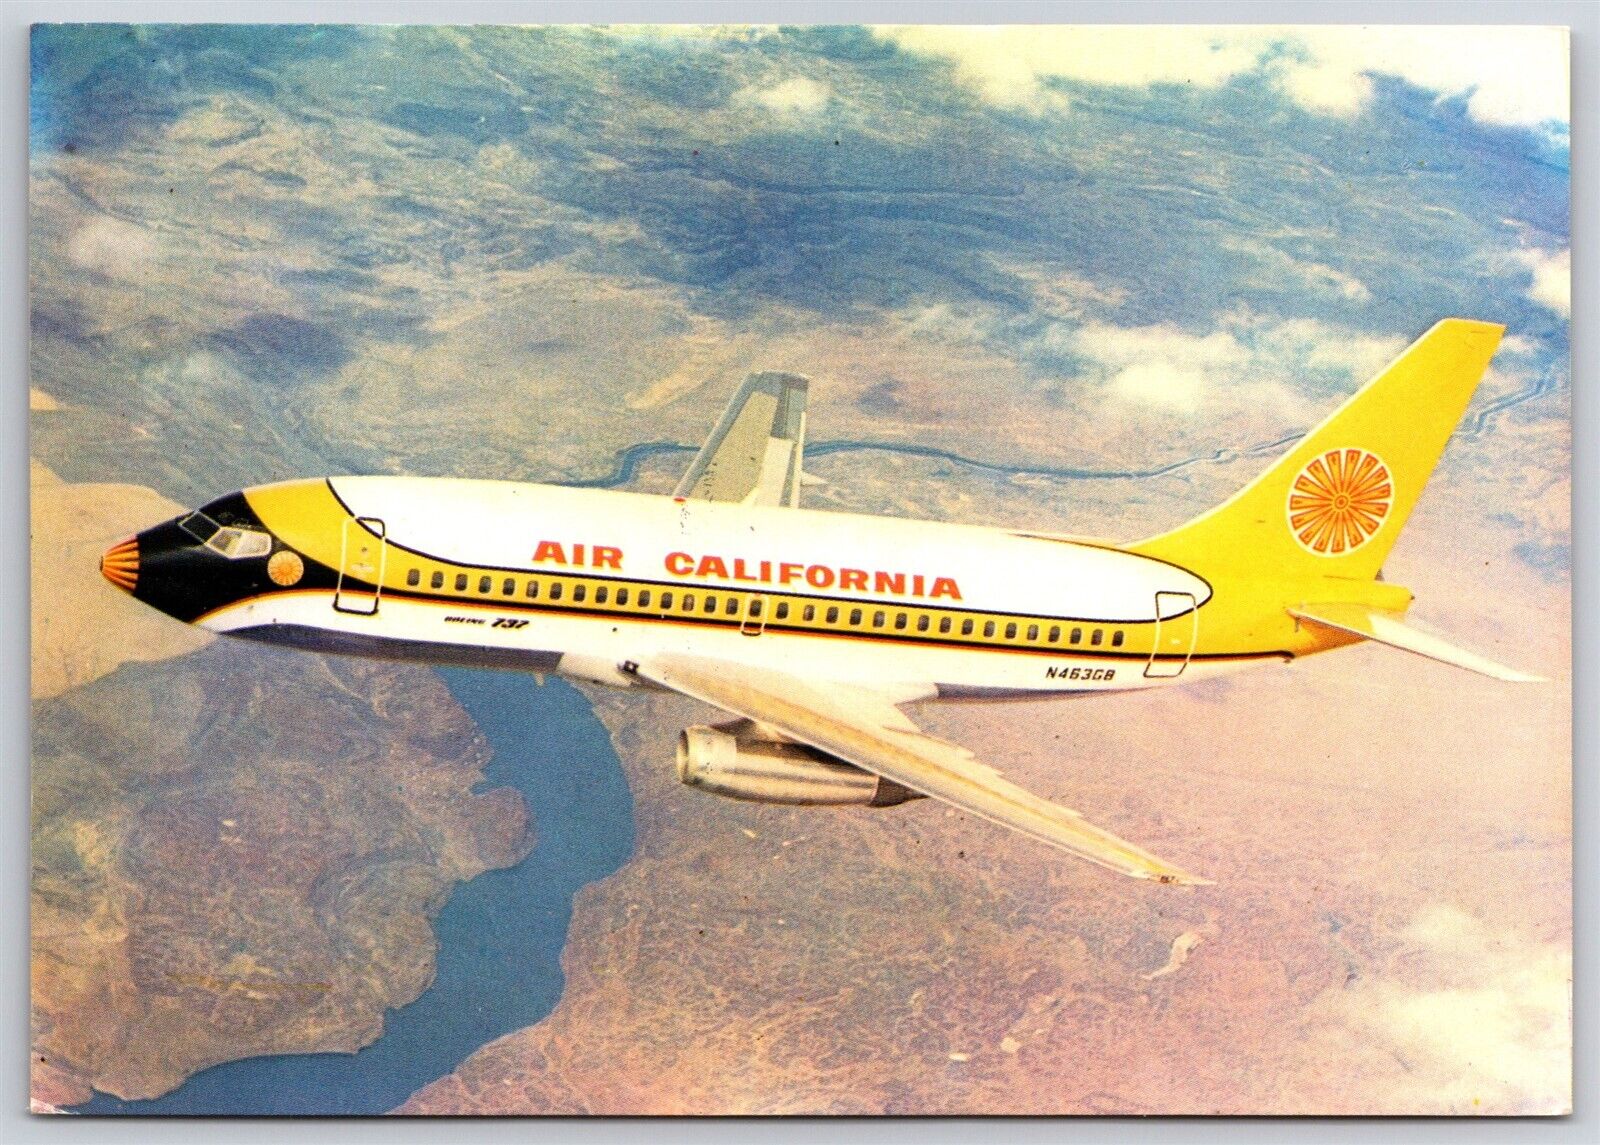 Airplane Postcard Air California Airlines Boeing 737-200 In Flight Movifoto CC3